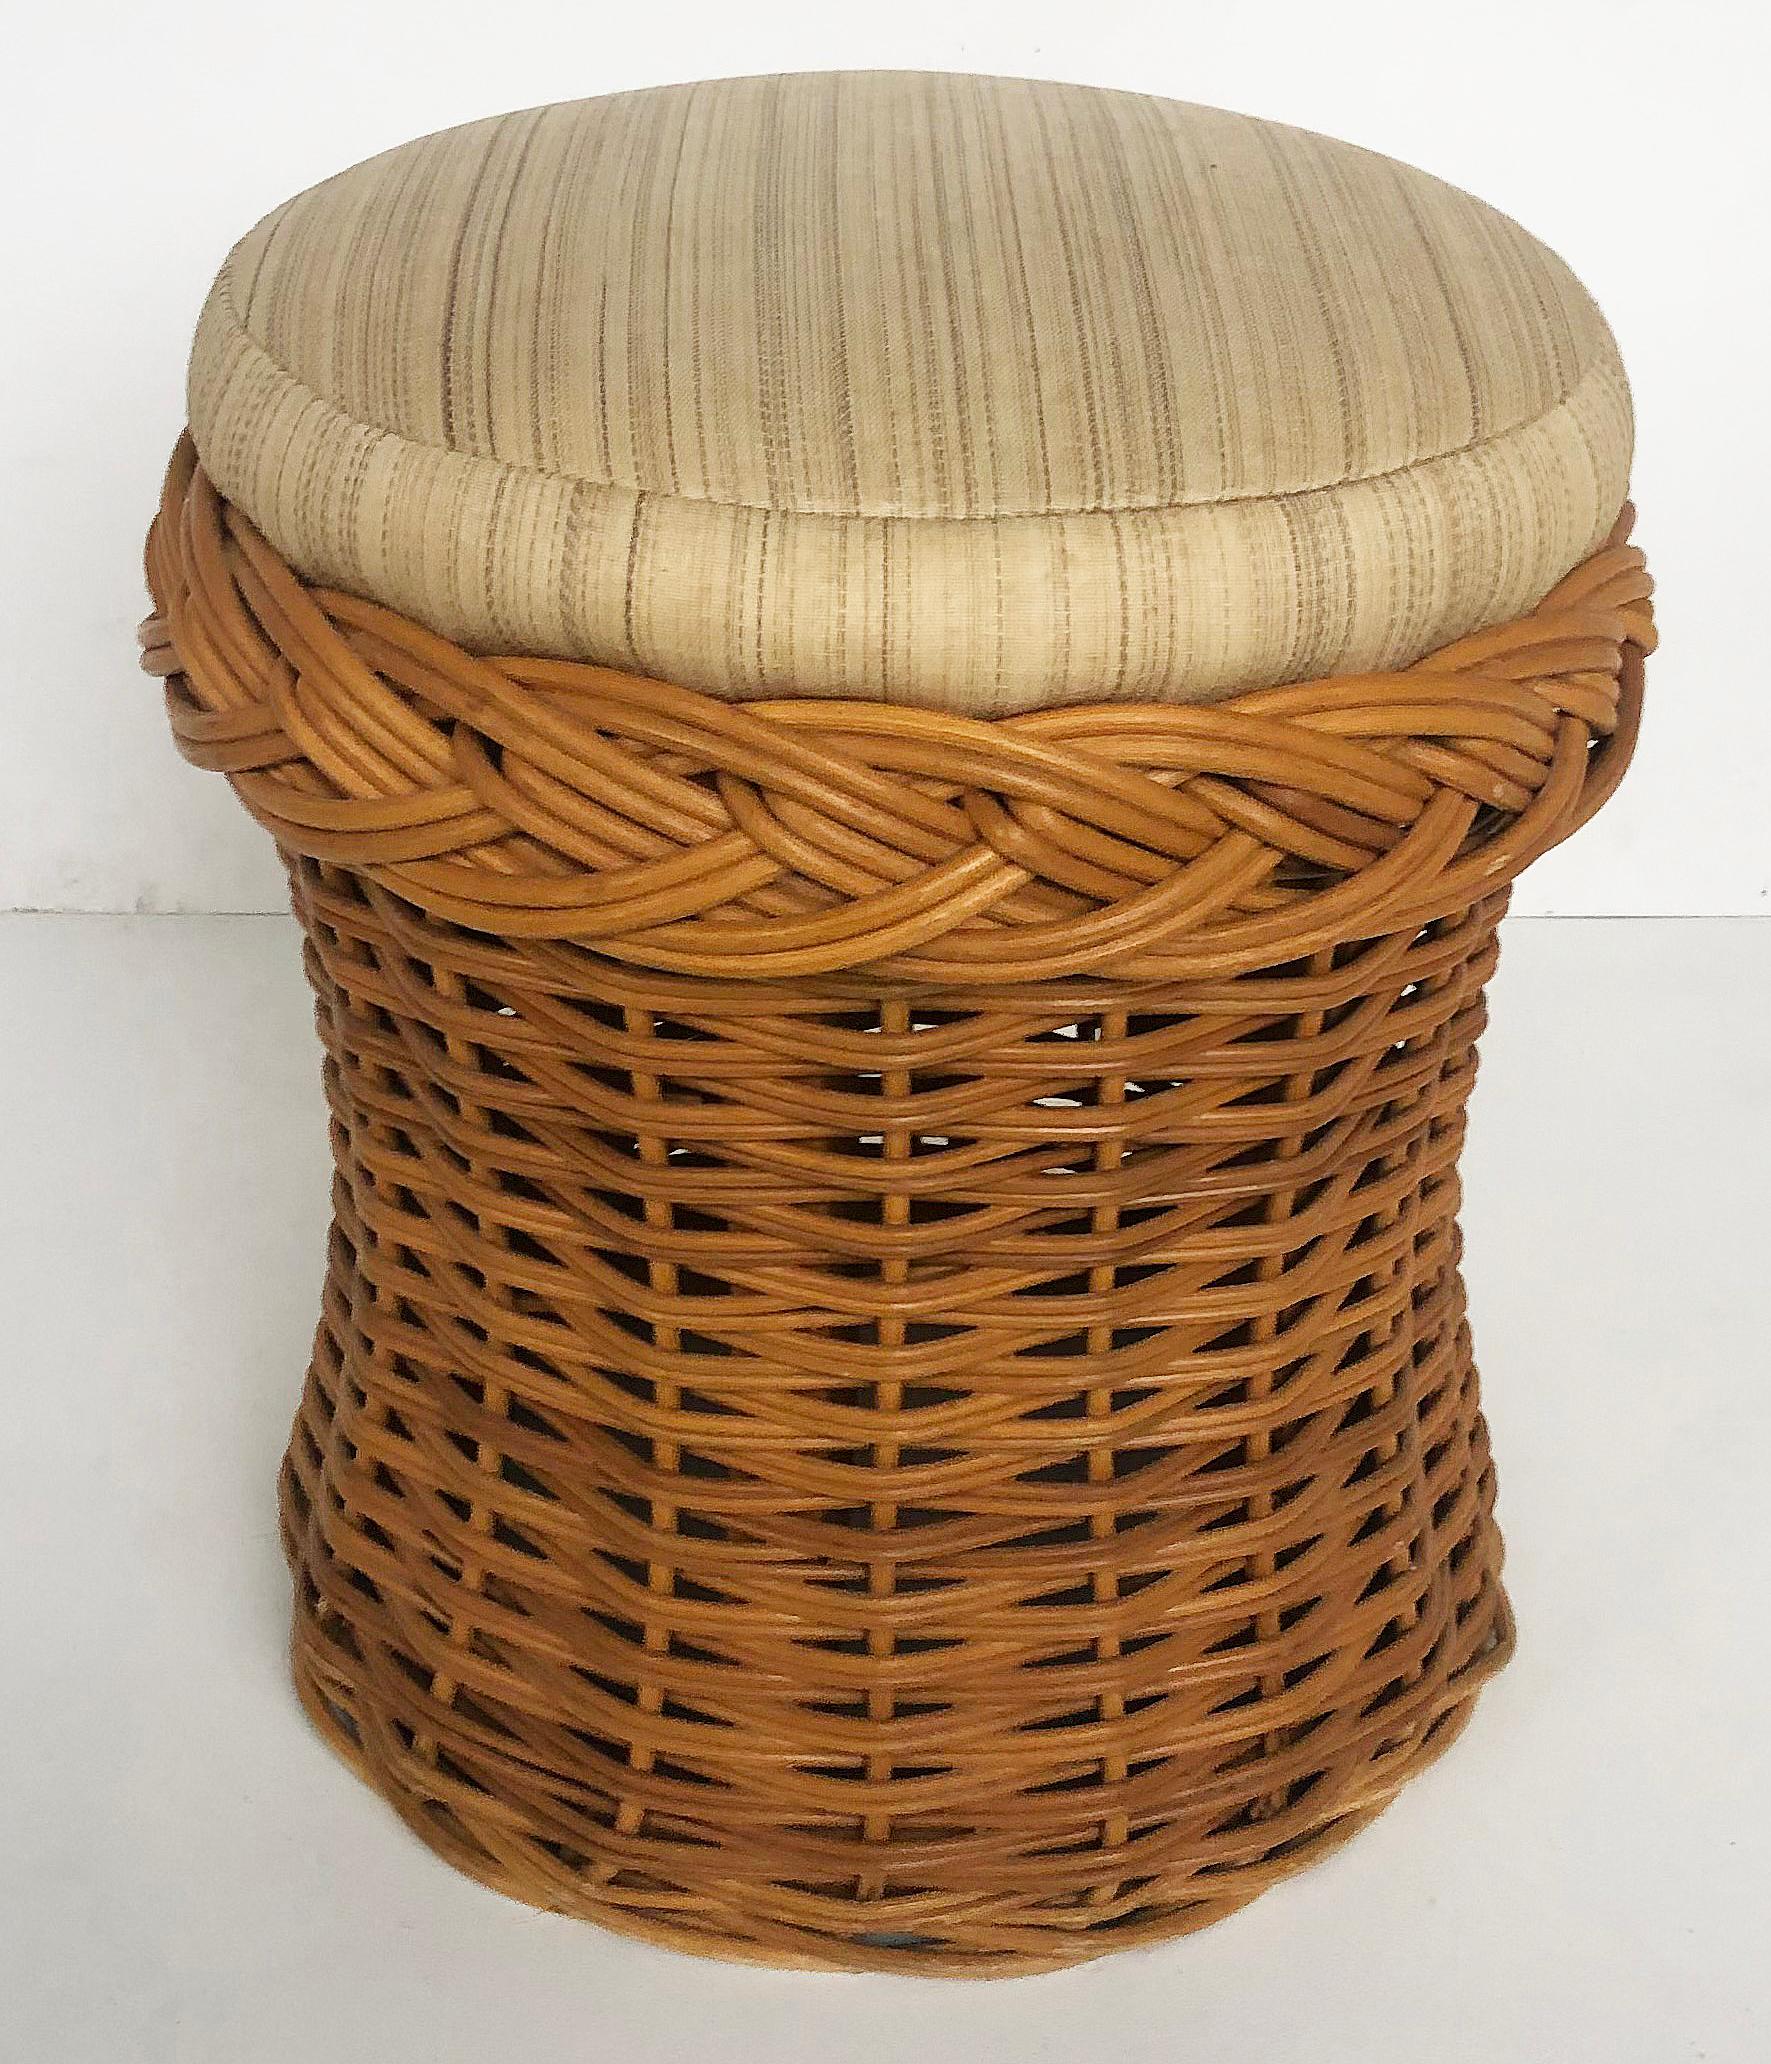 American Wicker Works Rattan Stool with Upholstered Seat Cushion